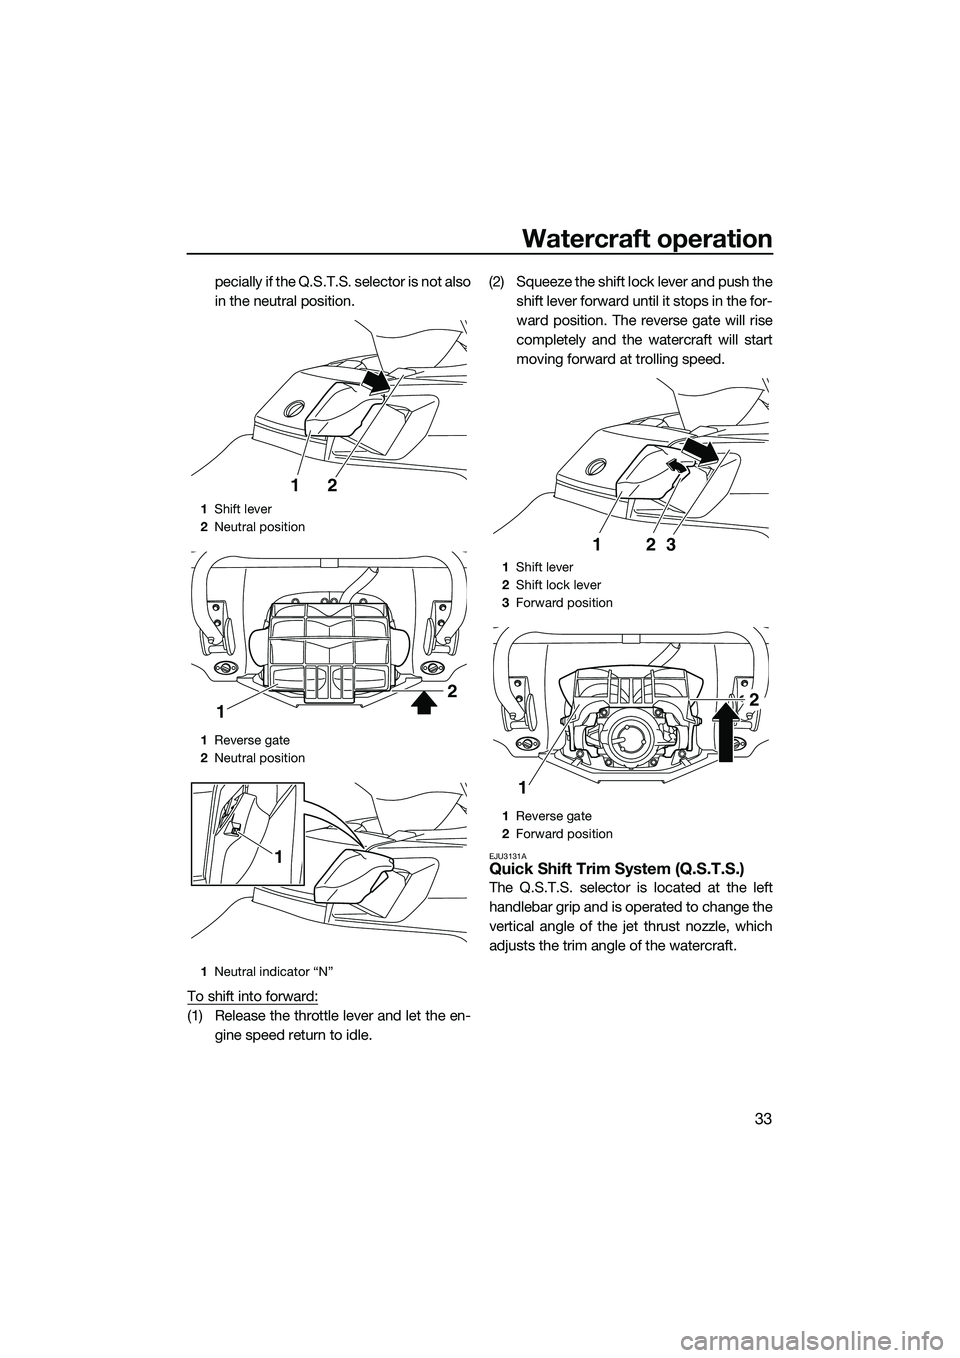 YAMAHA FX SVHO 2014  Owners Manual Watercraft operation
33
pecially if the Q.S.T.S. selector is not also
in the neutral position.
To shift into forward:
(1) Release the throttle lever and let the en- gine speed return to idle. (2) Sque